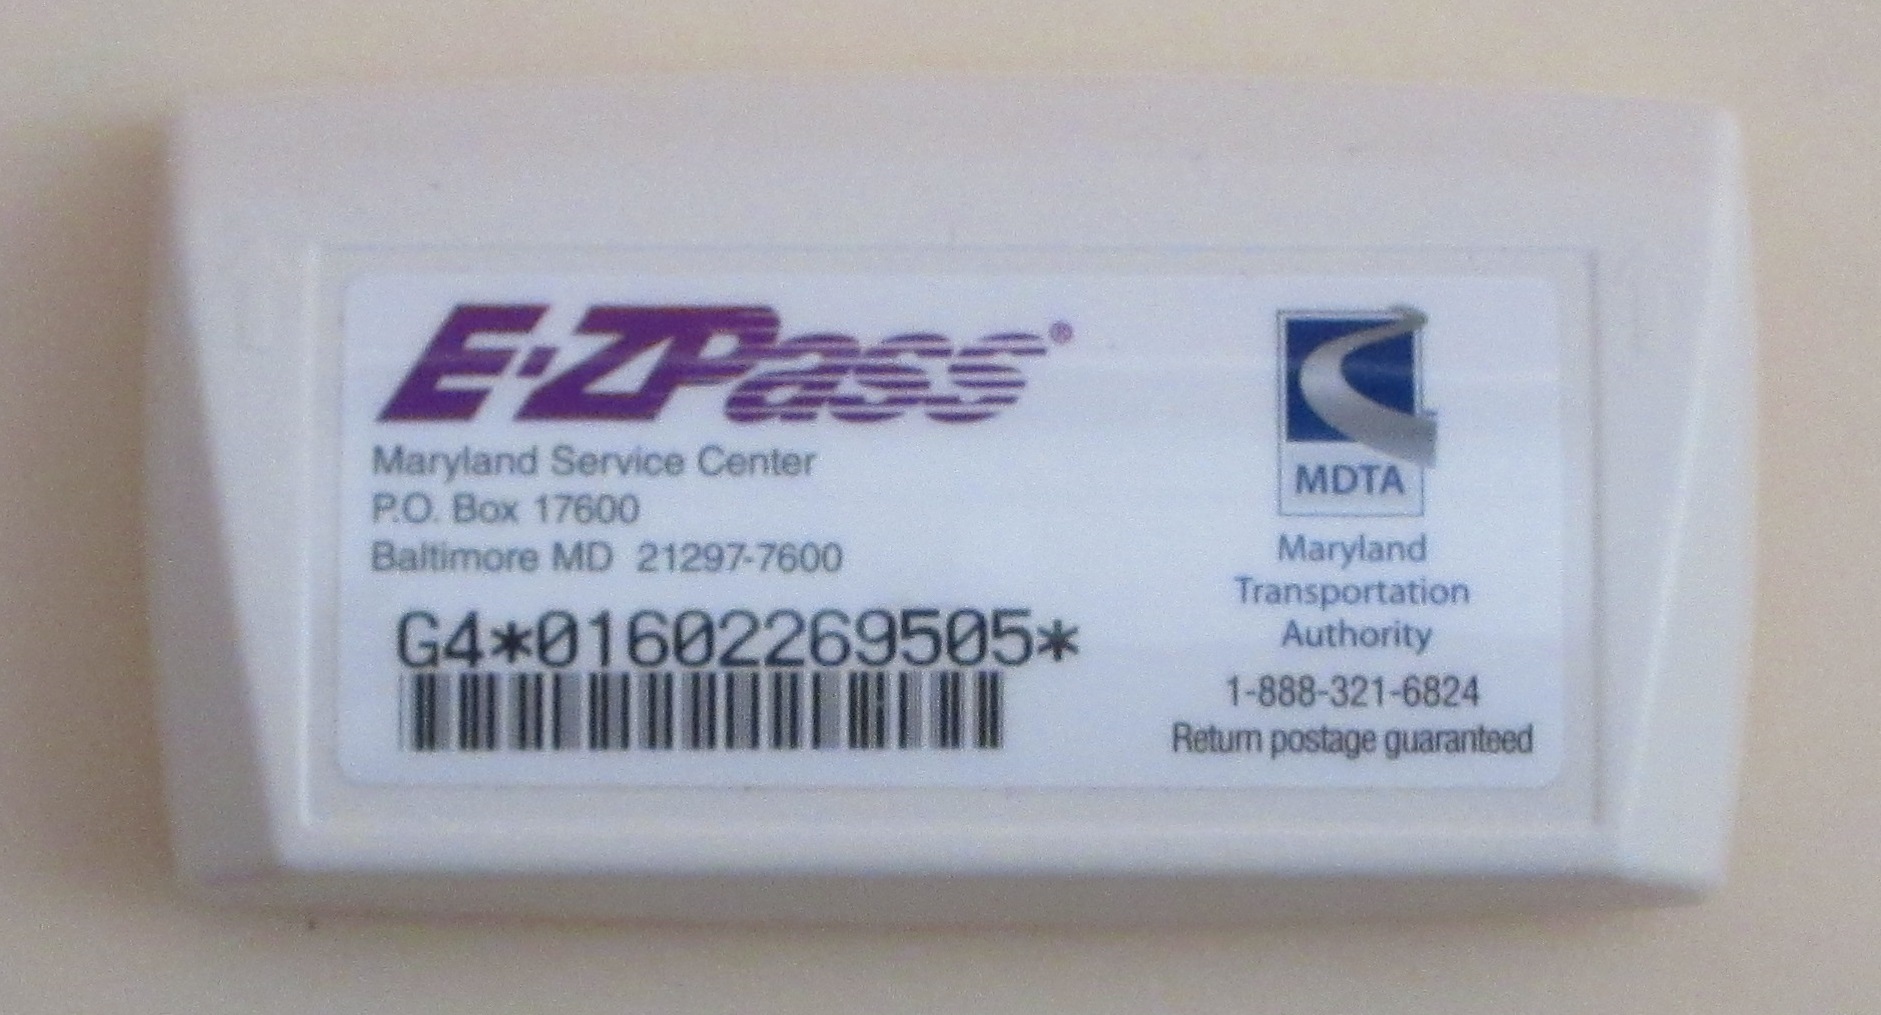 Replacing Maryland E-ZPass transponder is not so easy